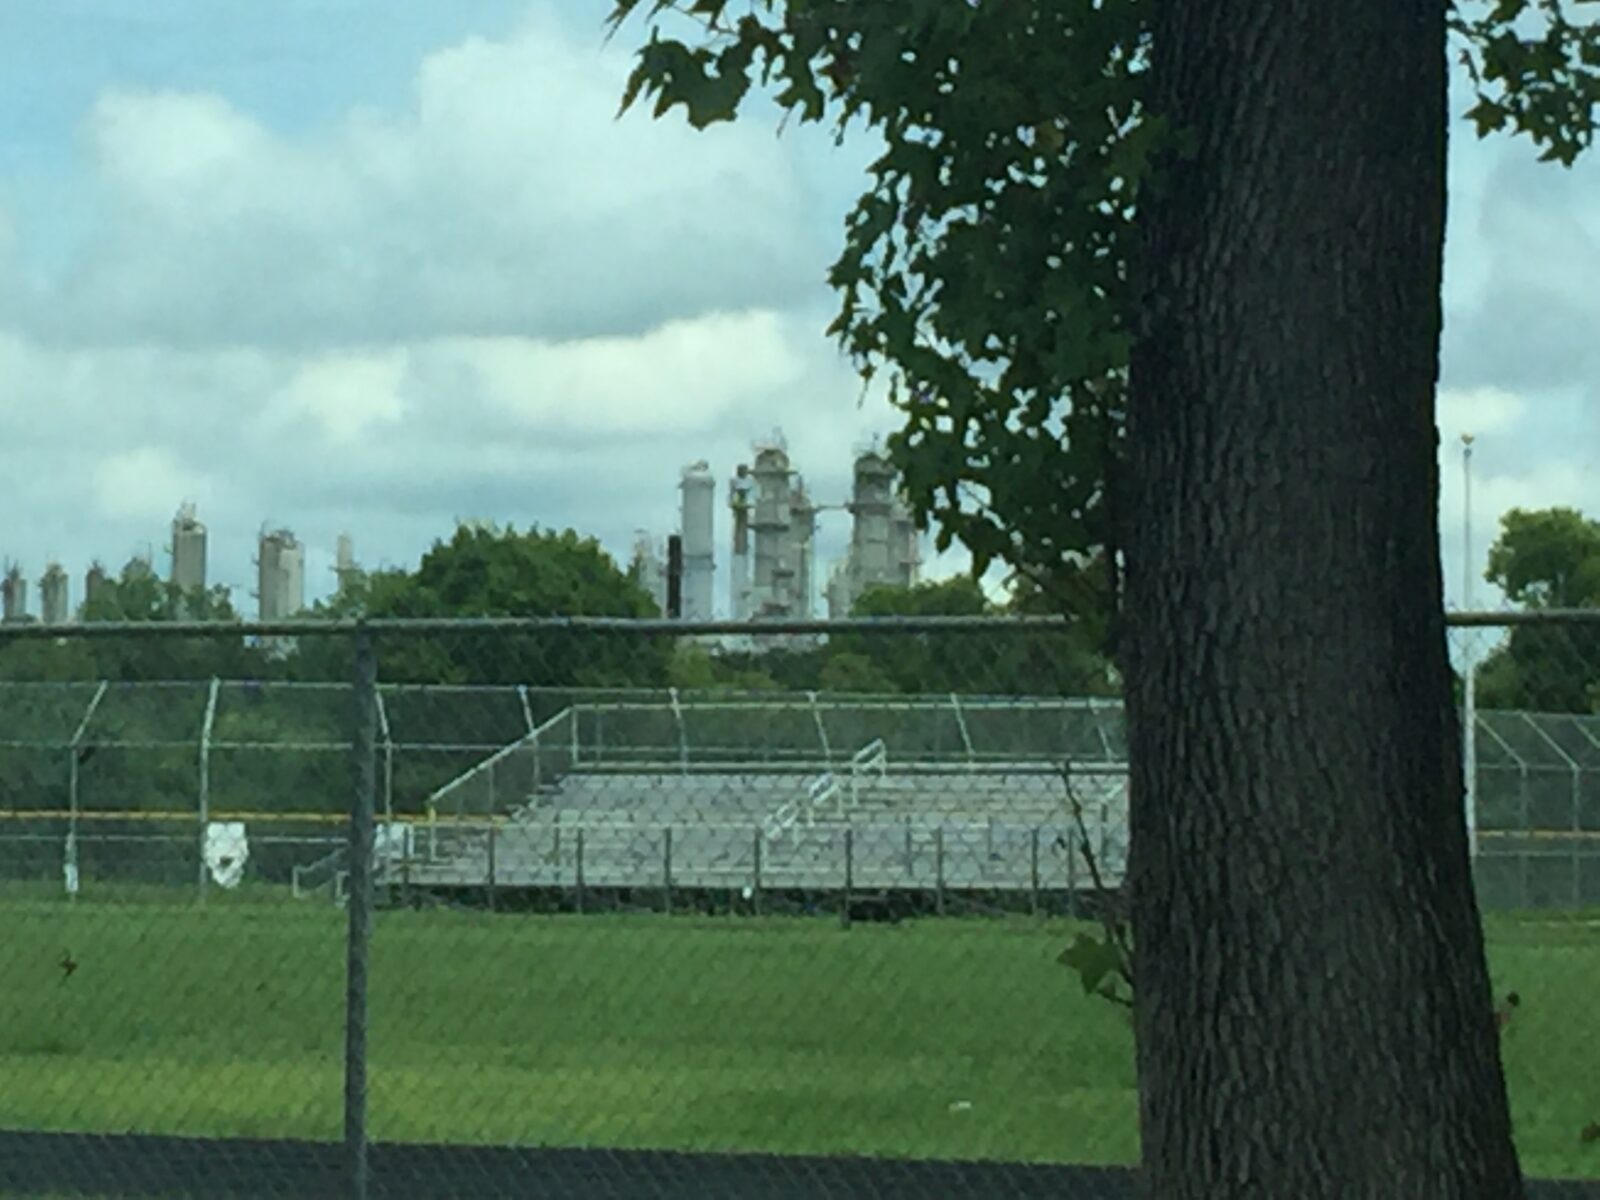 A school sports field can be seen in the frame; in the background there are smoke stacks releasing air pollution into the sky.